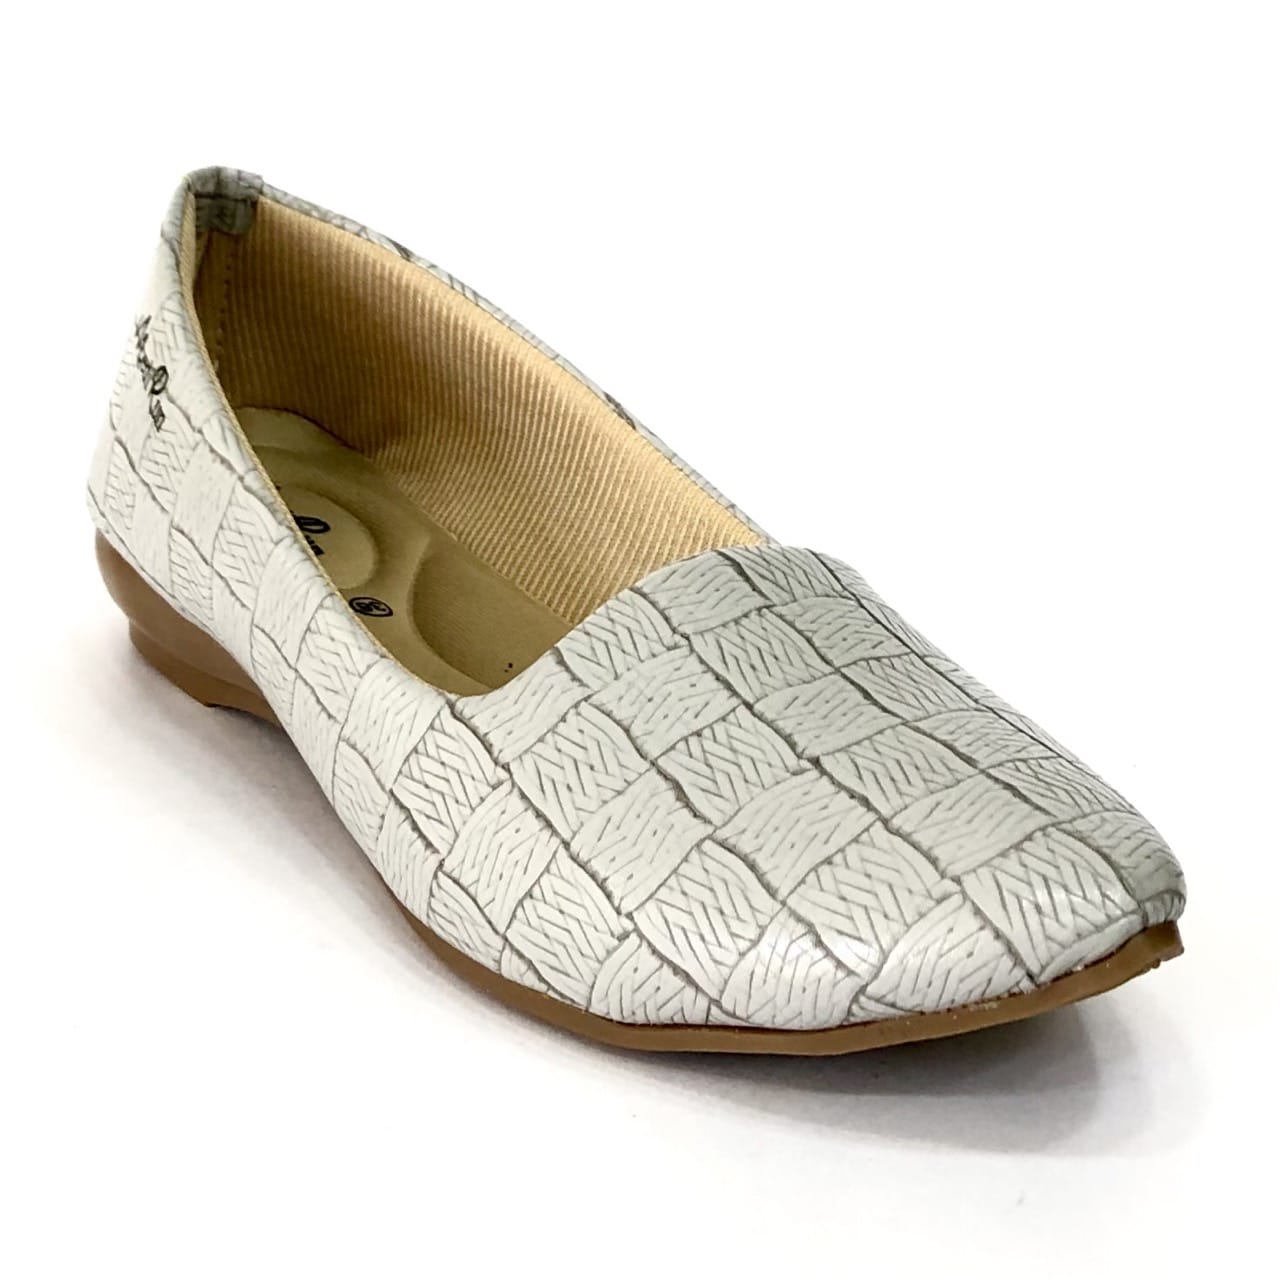 Buy Belly Shoes Online at Best Price in India - Ishaura.in